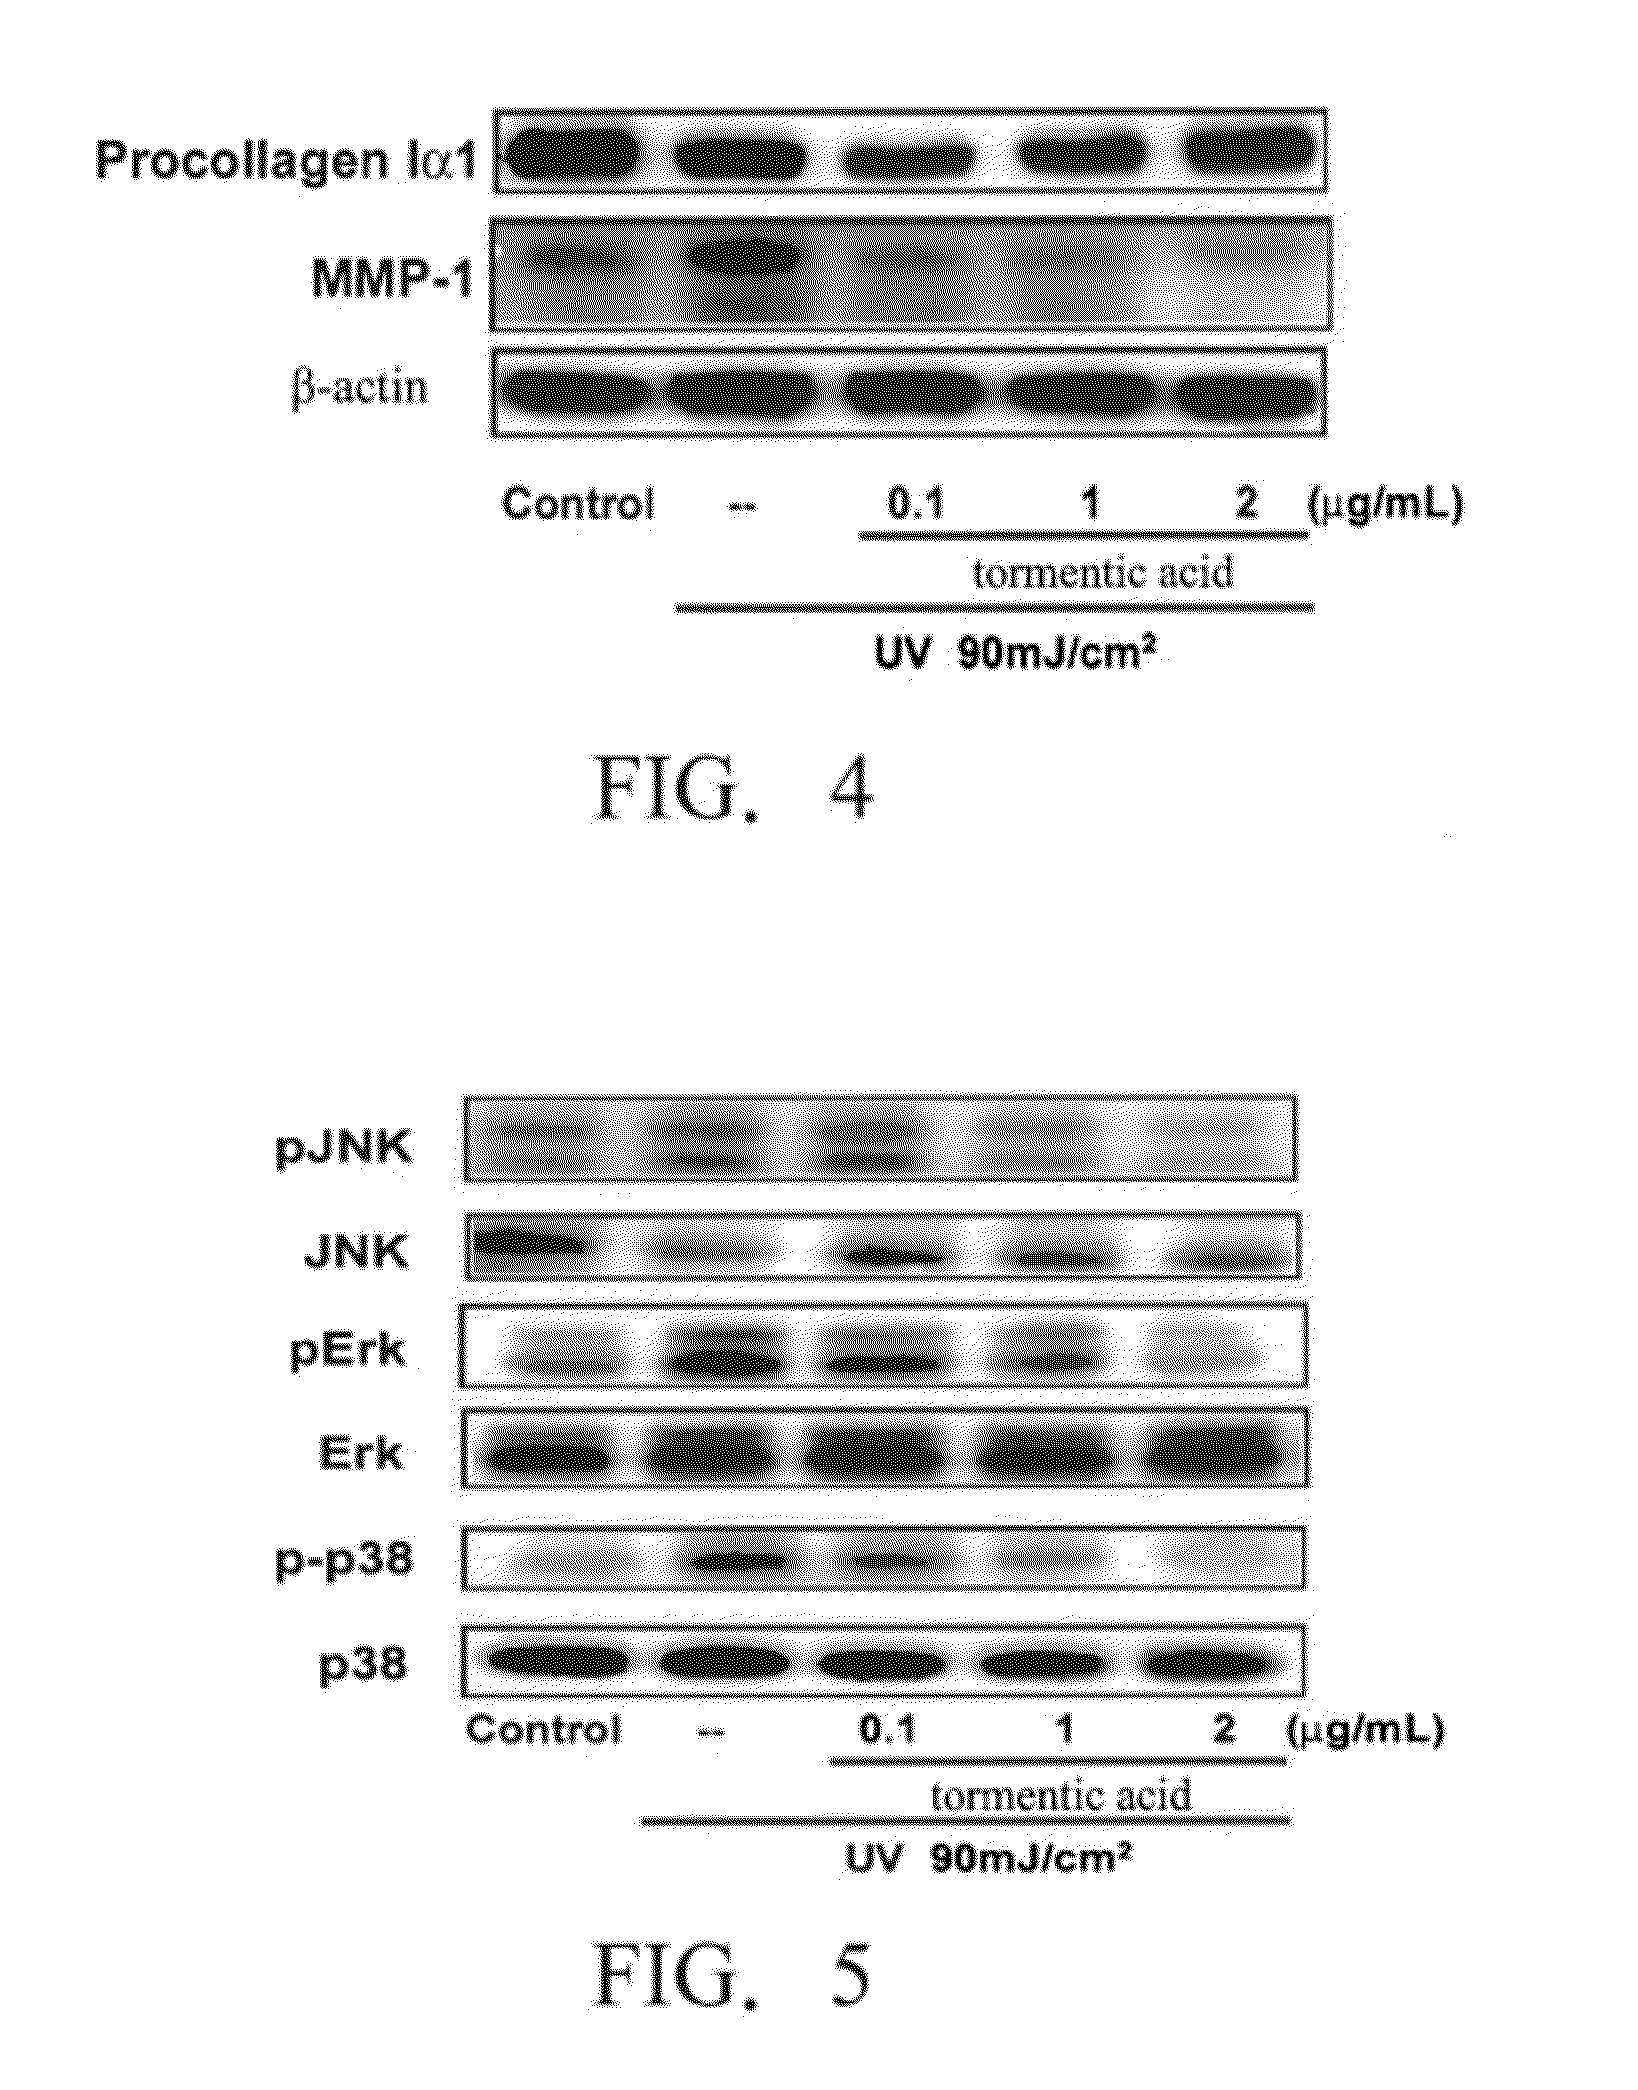 Method for inhibiting activity and/or expression of matrix metalloproteinase, inhibiting phosphorylation of mitogen-activated protein kinase, and/or promoting expression of collagen using tormentic acid